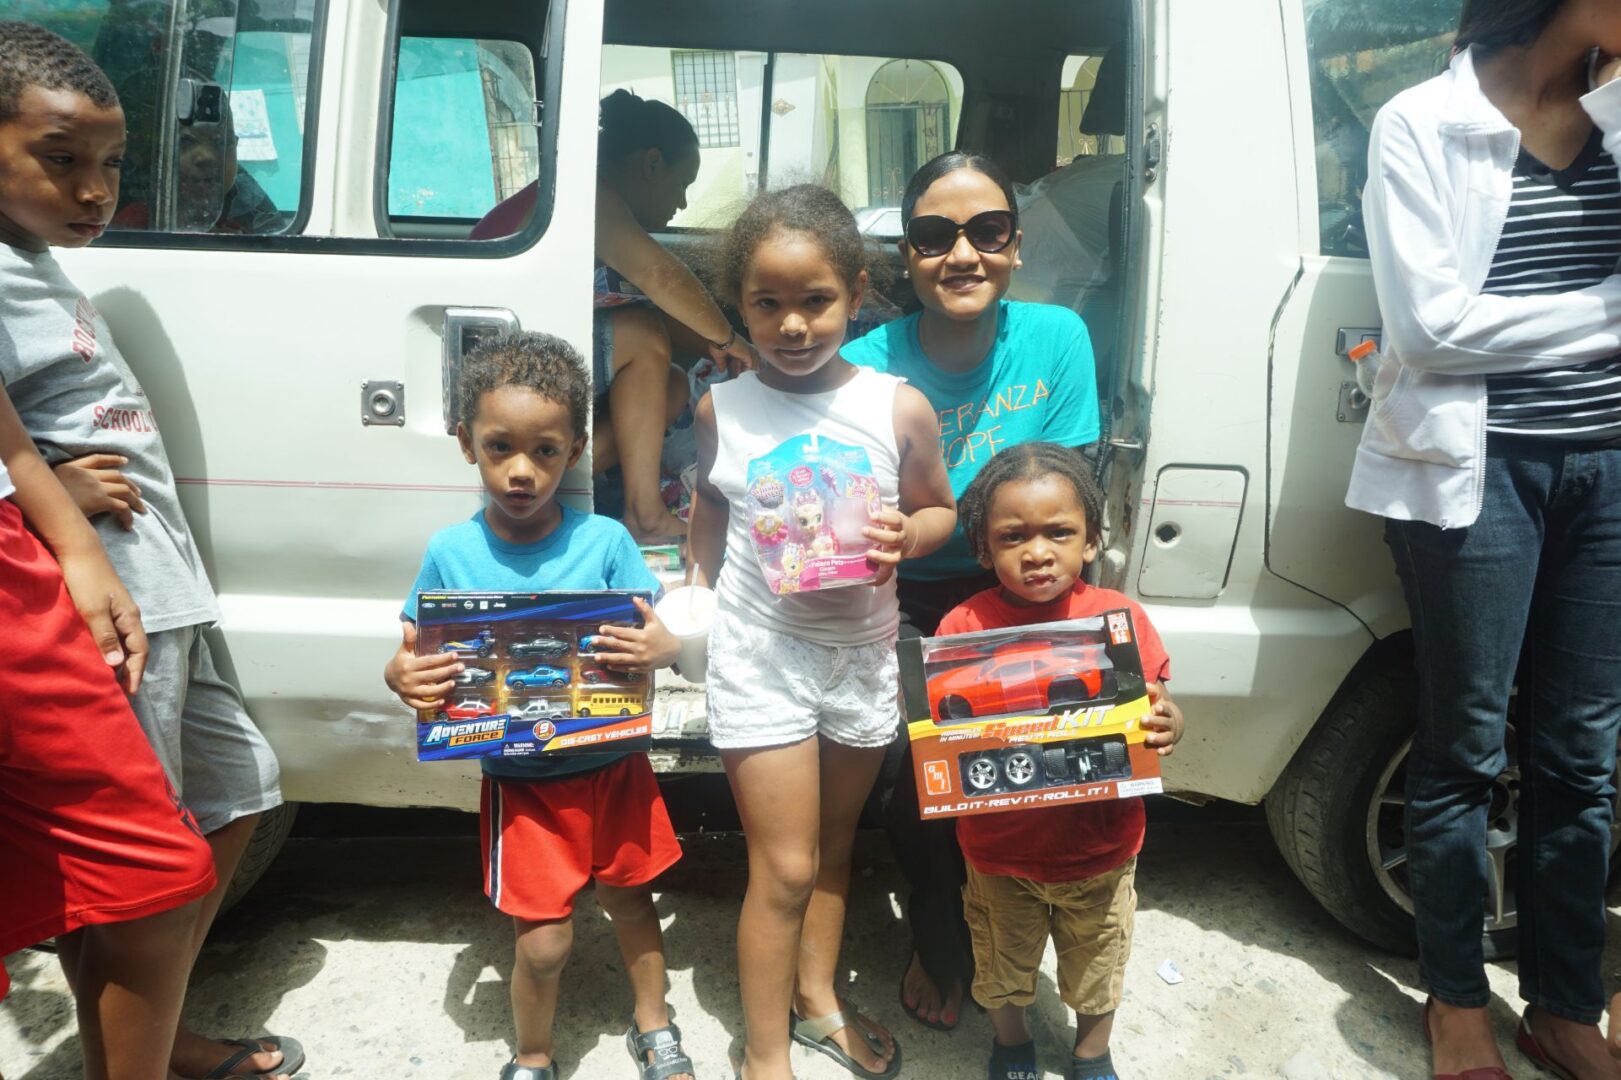 Our staff, a girl, and two boys, the children holding toys outside the car